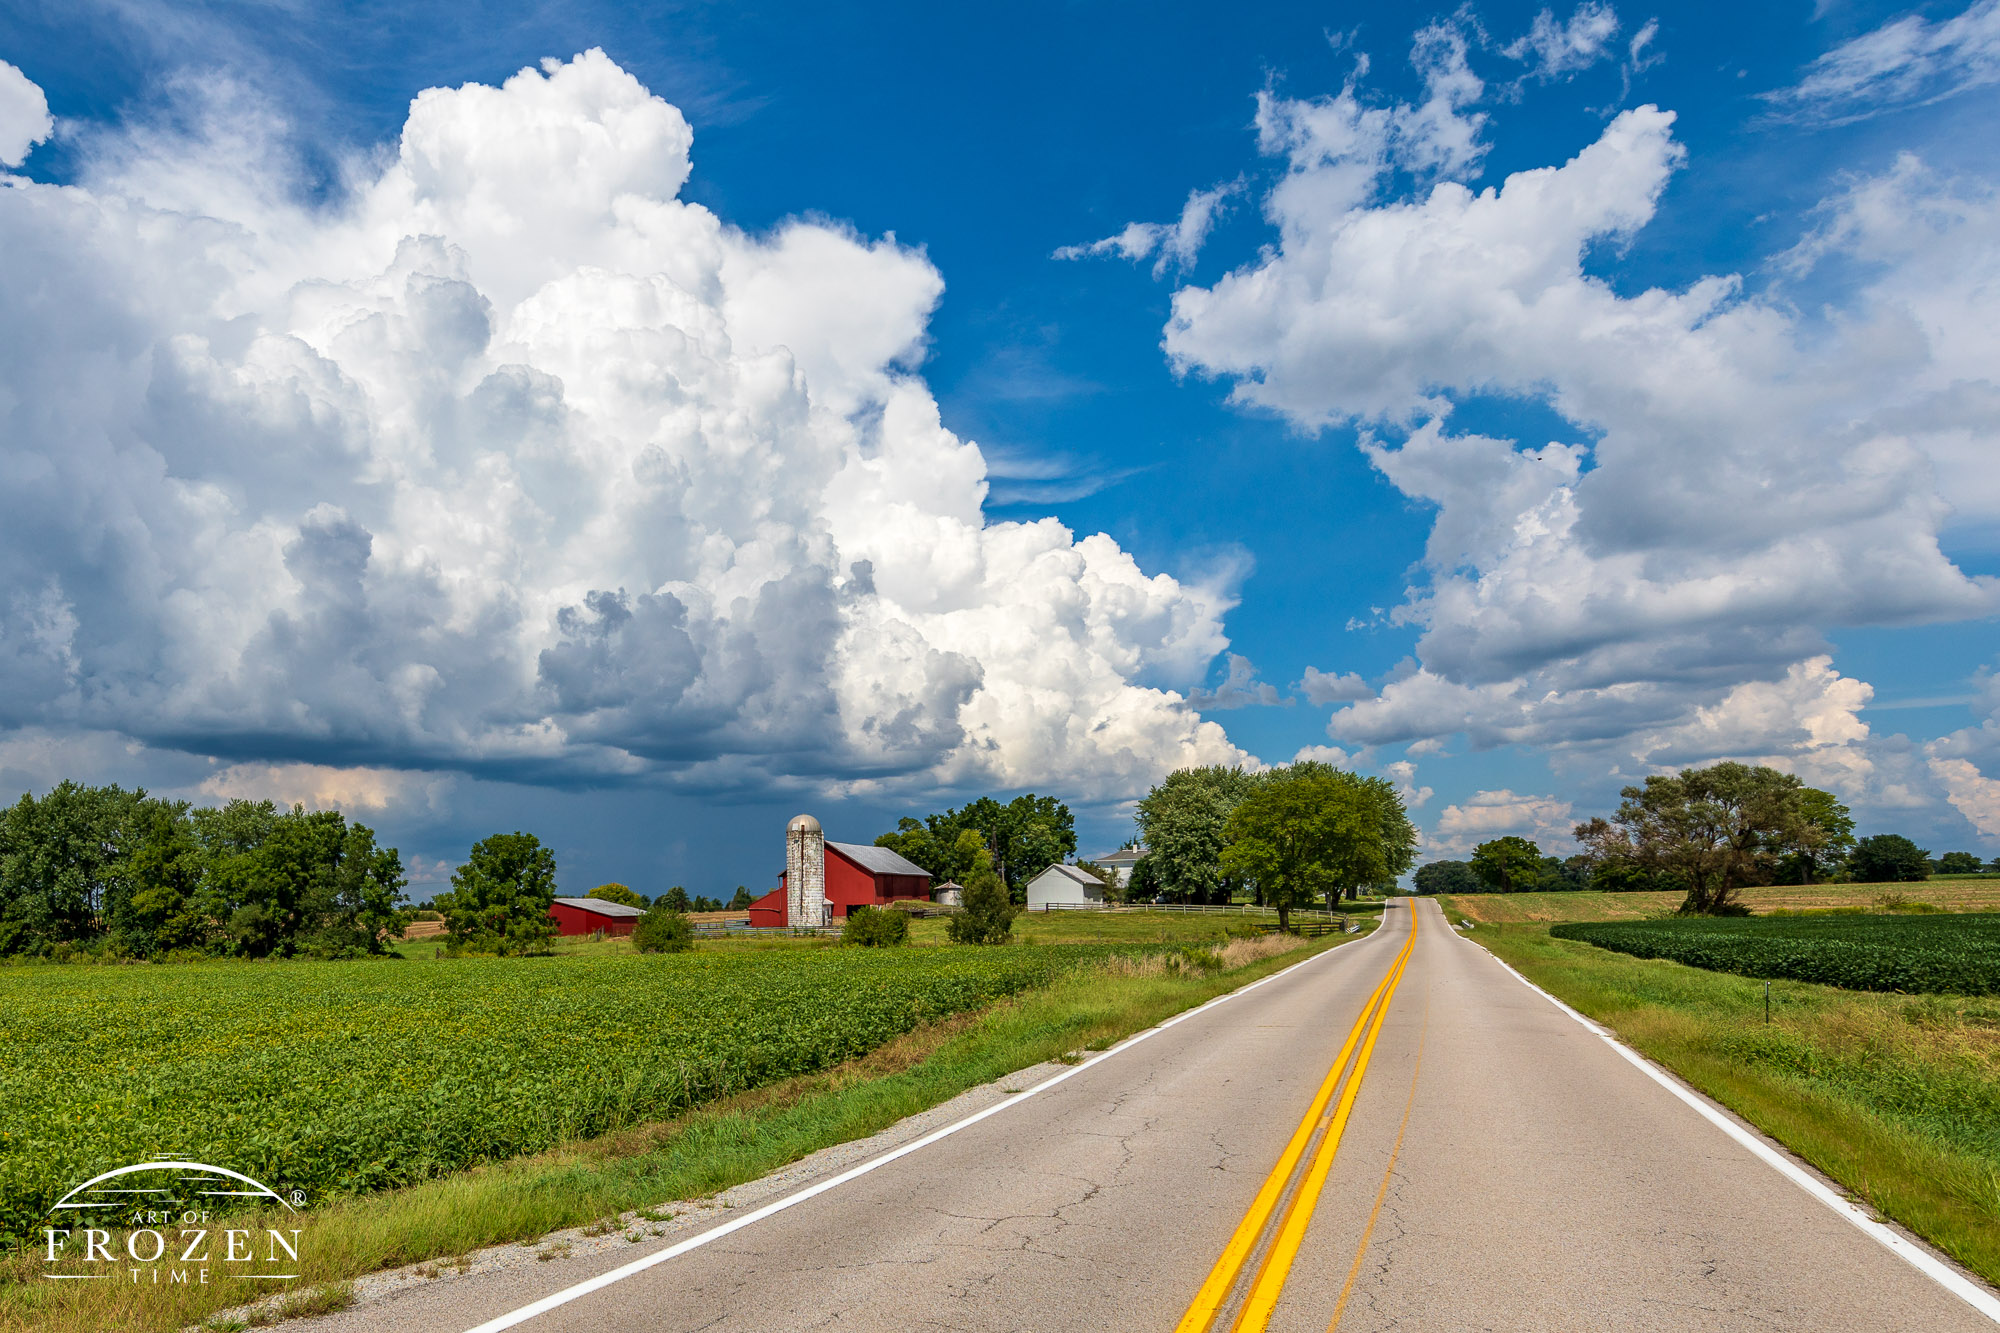 As this country road leads the eye to the distant horizon, an Ohio farm resides under blue September skies and puffy towering cumulus clouds